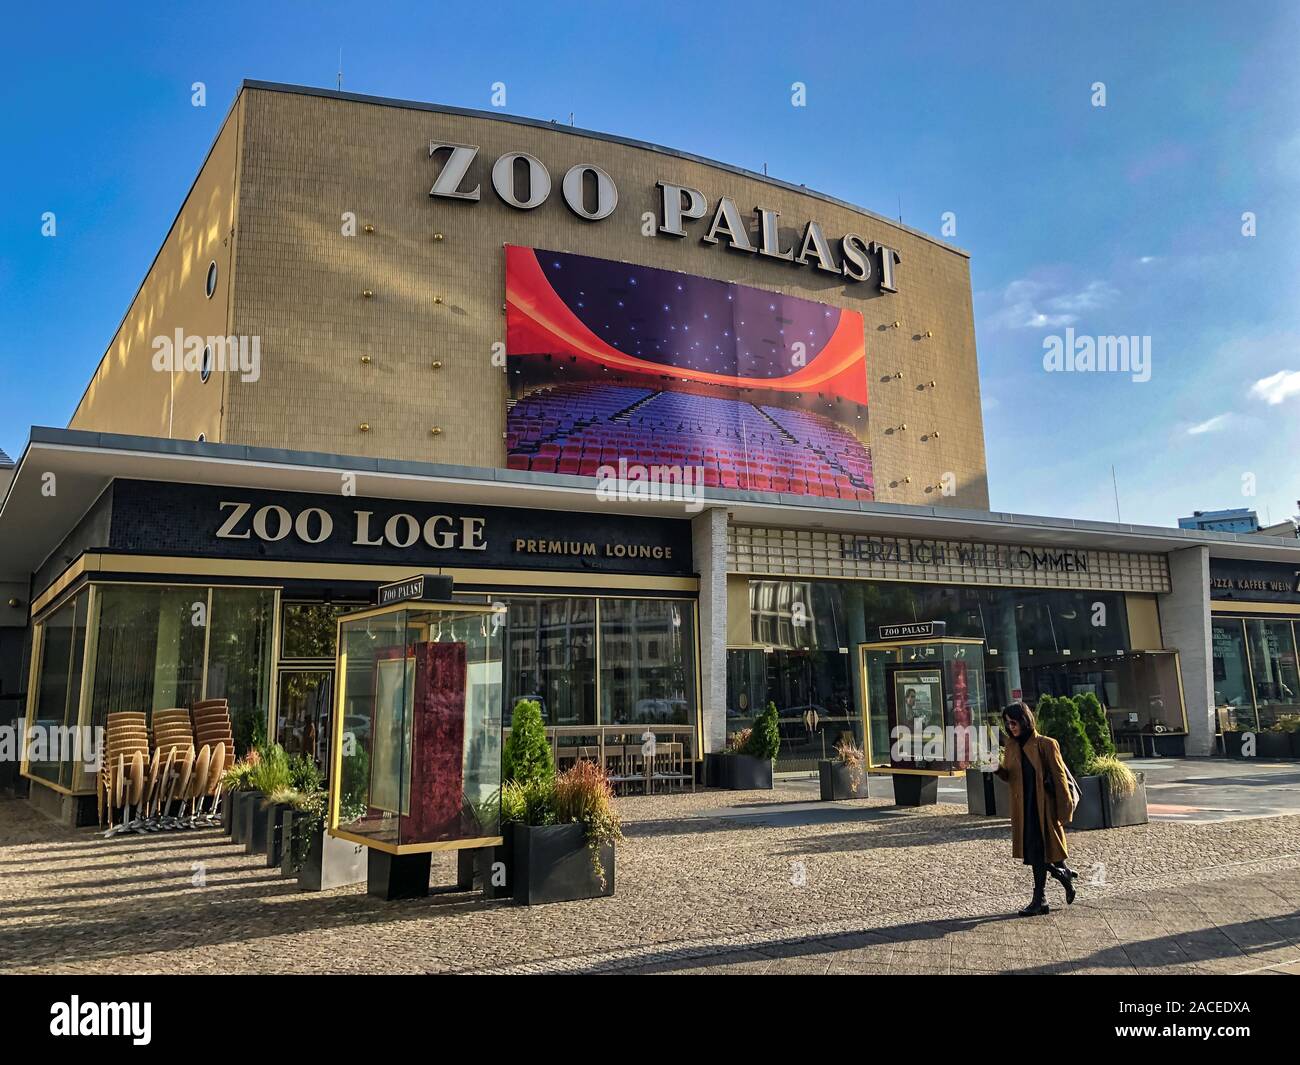 Berlin, Germany - Oct 9, 2019:  The front entrance to the Zoo Palast in Beriln Stock Photo